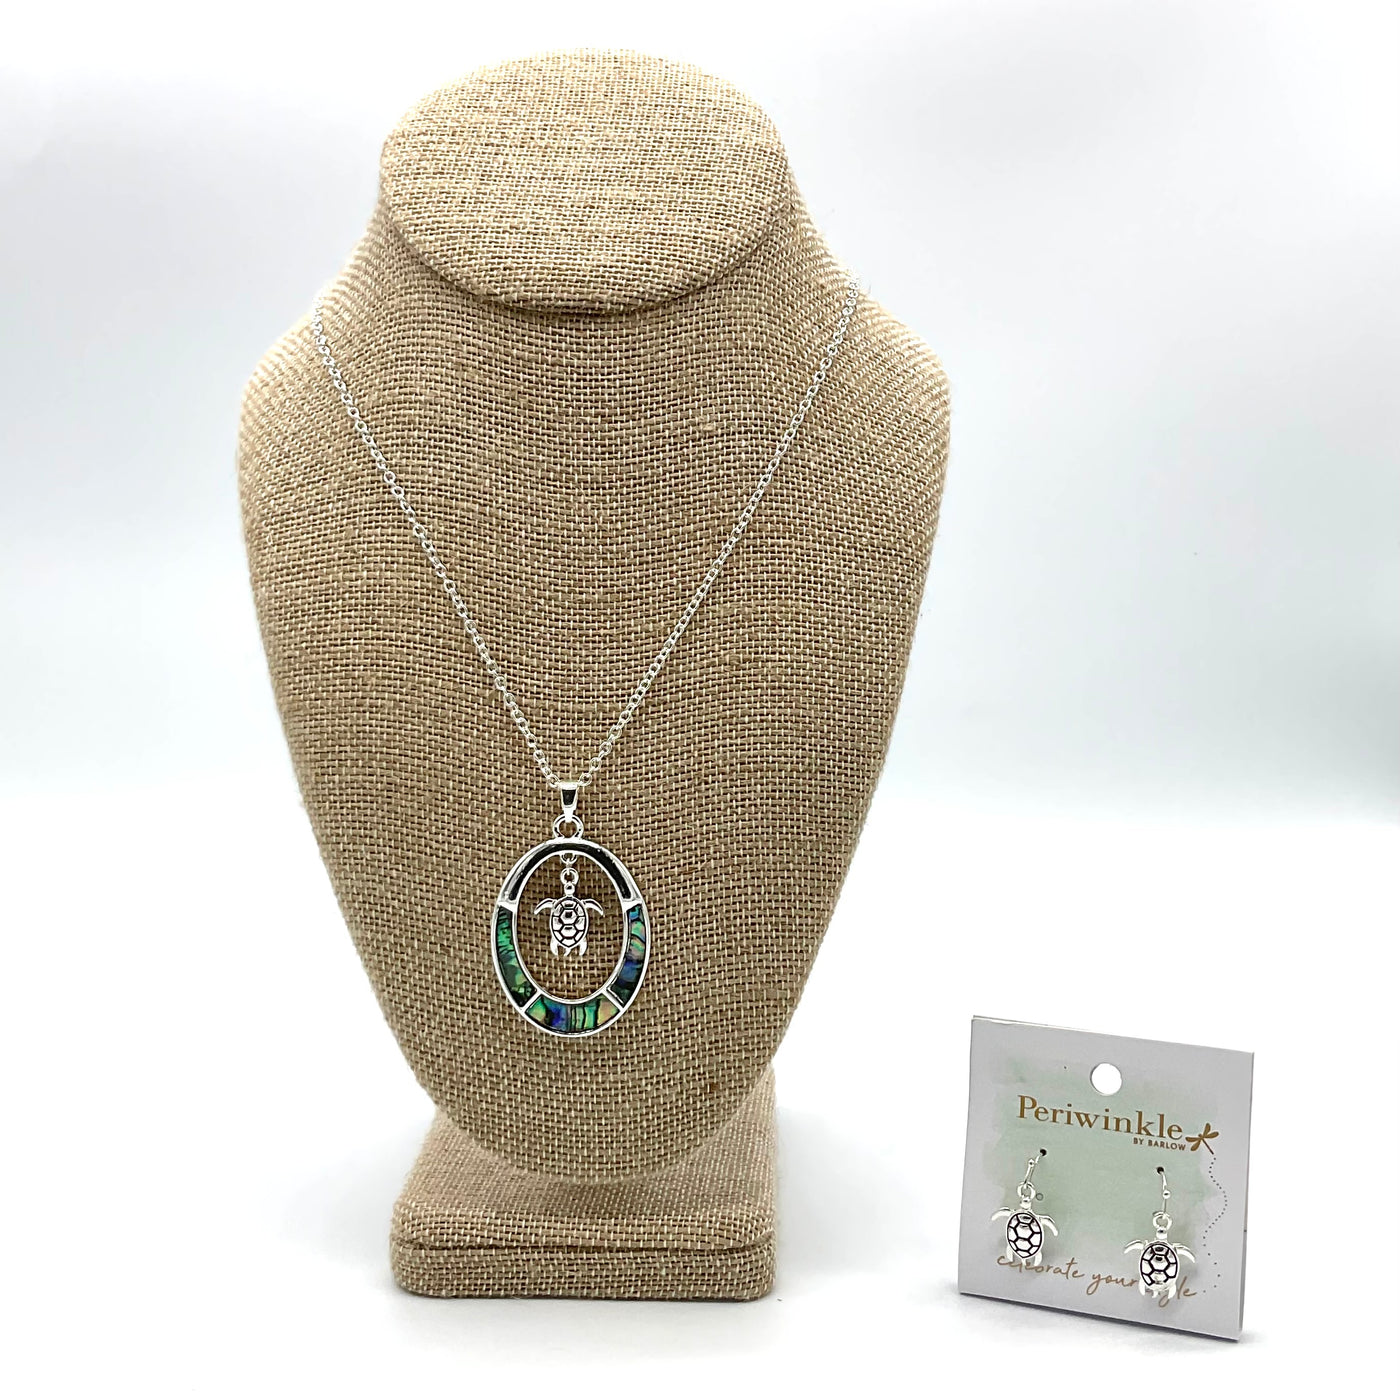 Necklace and Earring Sets by Periwinkle